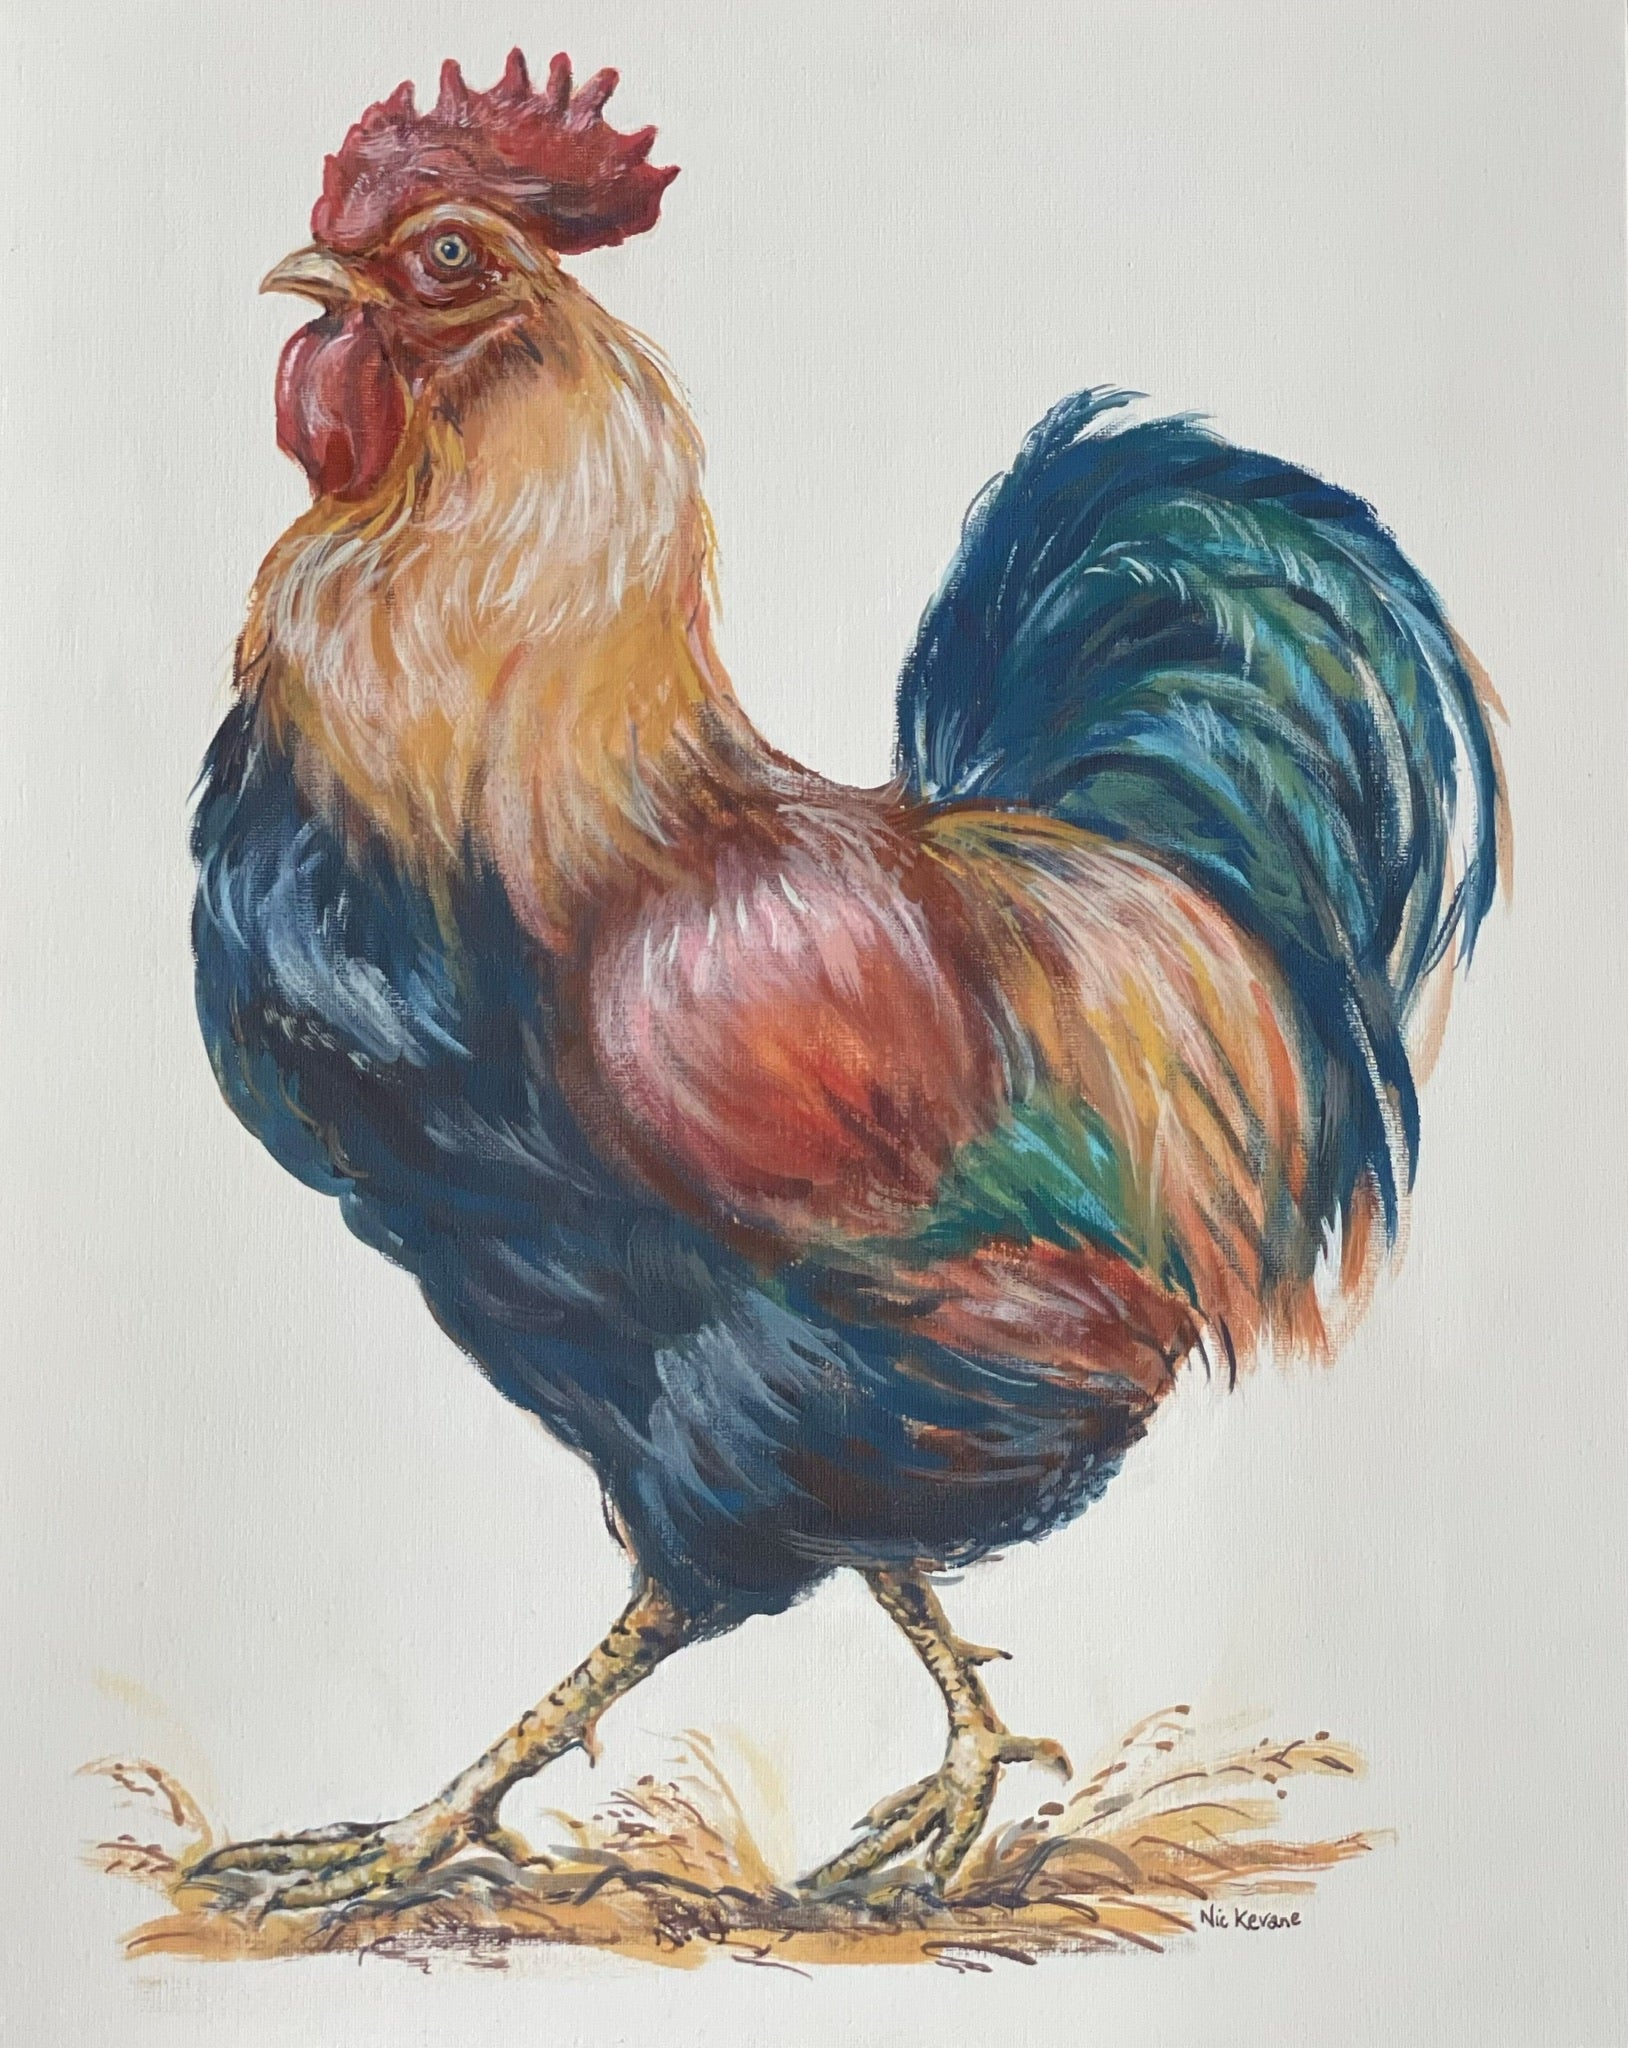 An impressive strutting cockerel painting. The iridescent plumage of chickens is beautiful, the self-important demeanour of the cockerel is quite comical.